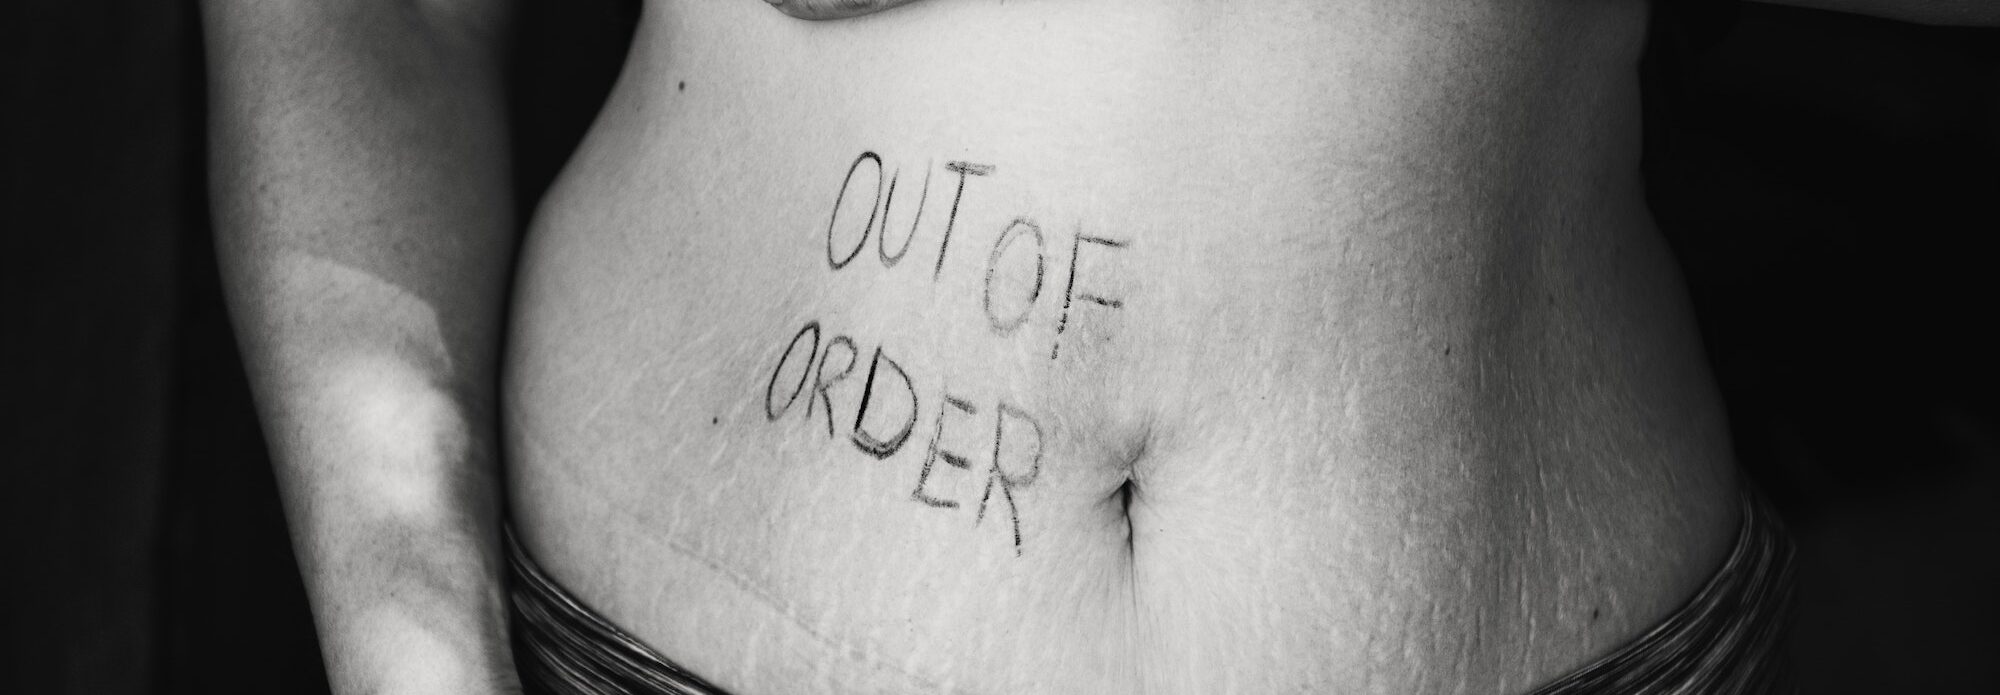 Words "Out of order" on woman's belly